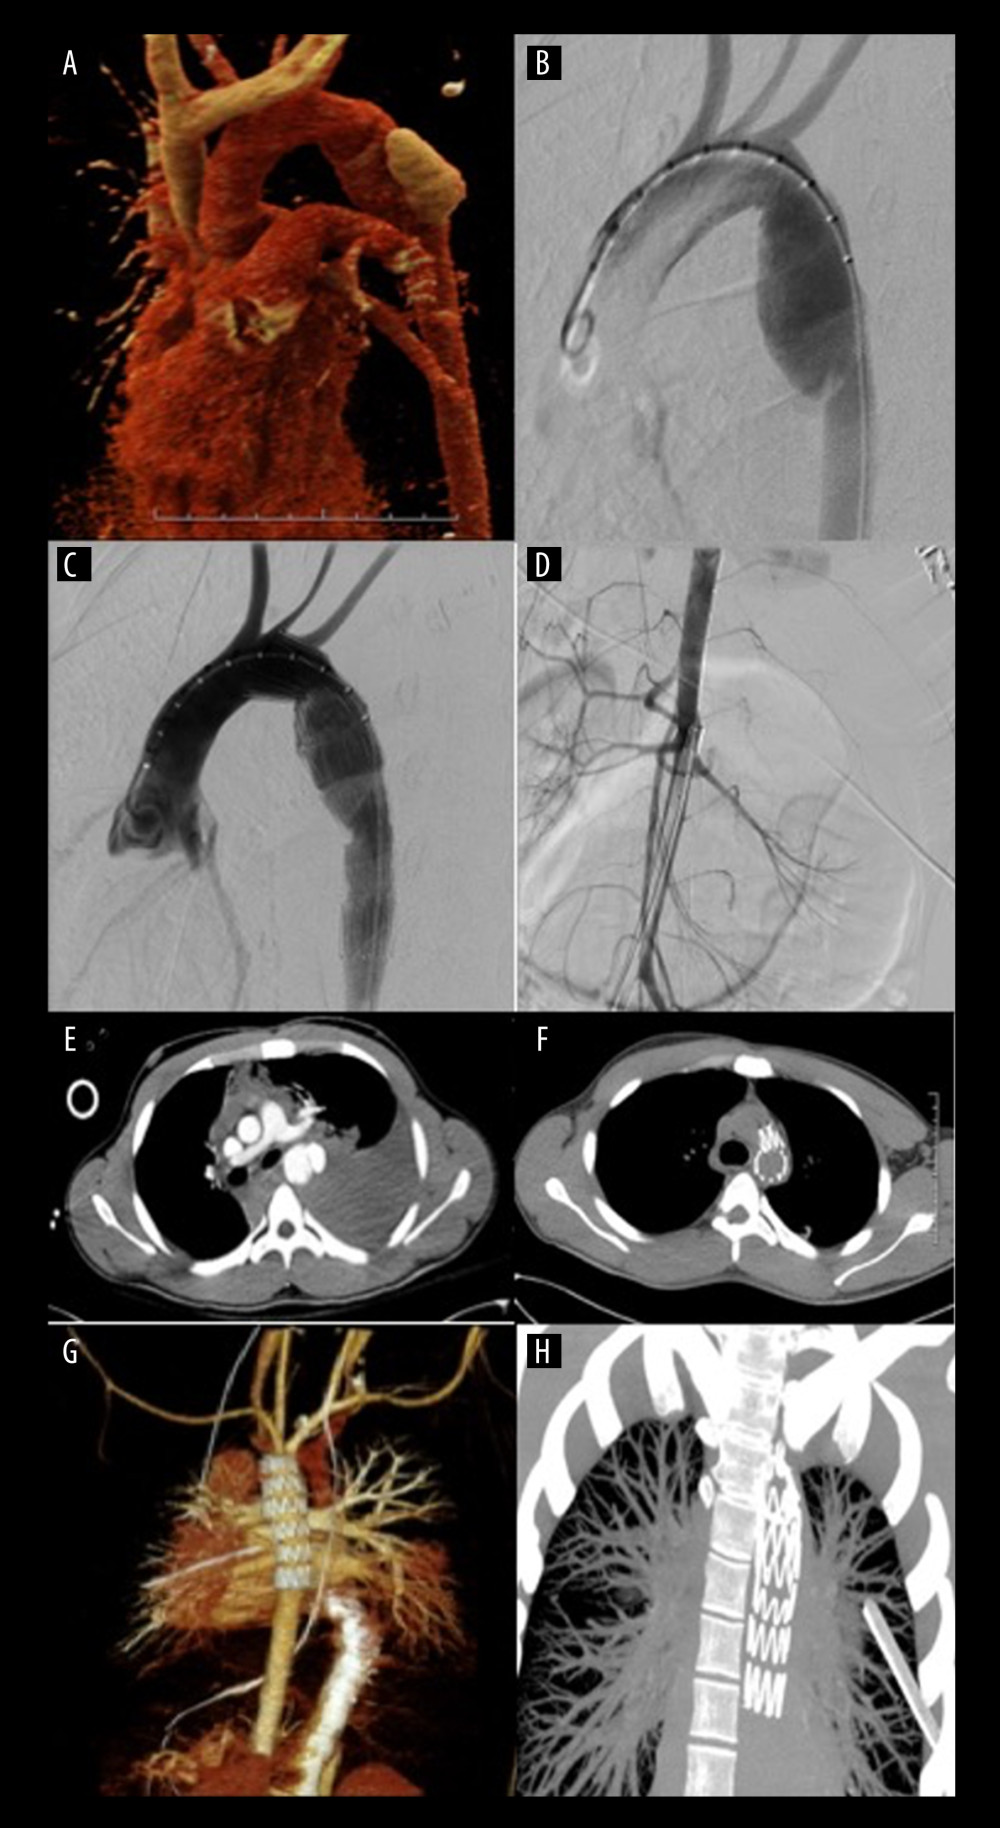 Tension hemothorax after thoracic aortic transection(A) Computed tomography (CT) angiogram volume rendering technique (VRT) reconstruction with contrast agent leakage. (B) Digital subtraction angiography showing dissection in loco typico. (C) ZDEG (Cook) stent graft implantation. (D) Abdominal aorta hypovolemia. (E) CT showing severe hemothorax and aortic injury. (F) CT follow-up after stent graft and hemothorax drainage. (G) CT angiogram follow-up 3D VRT reconstruction after stent graft placement. (H) CT follow-up maximum intensity projection after hemothorax drainage.